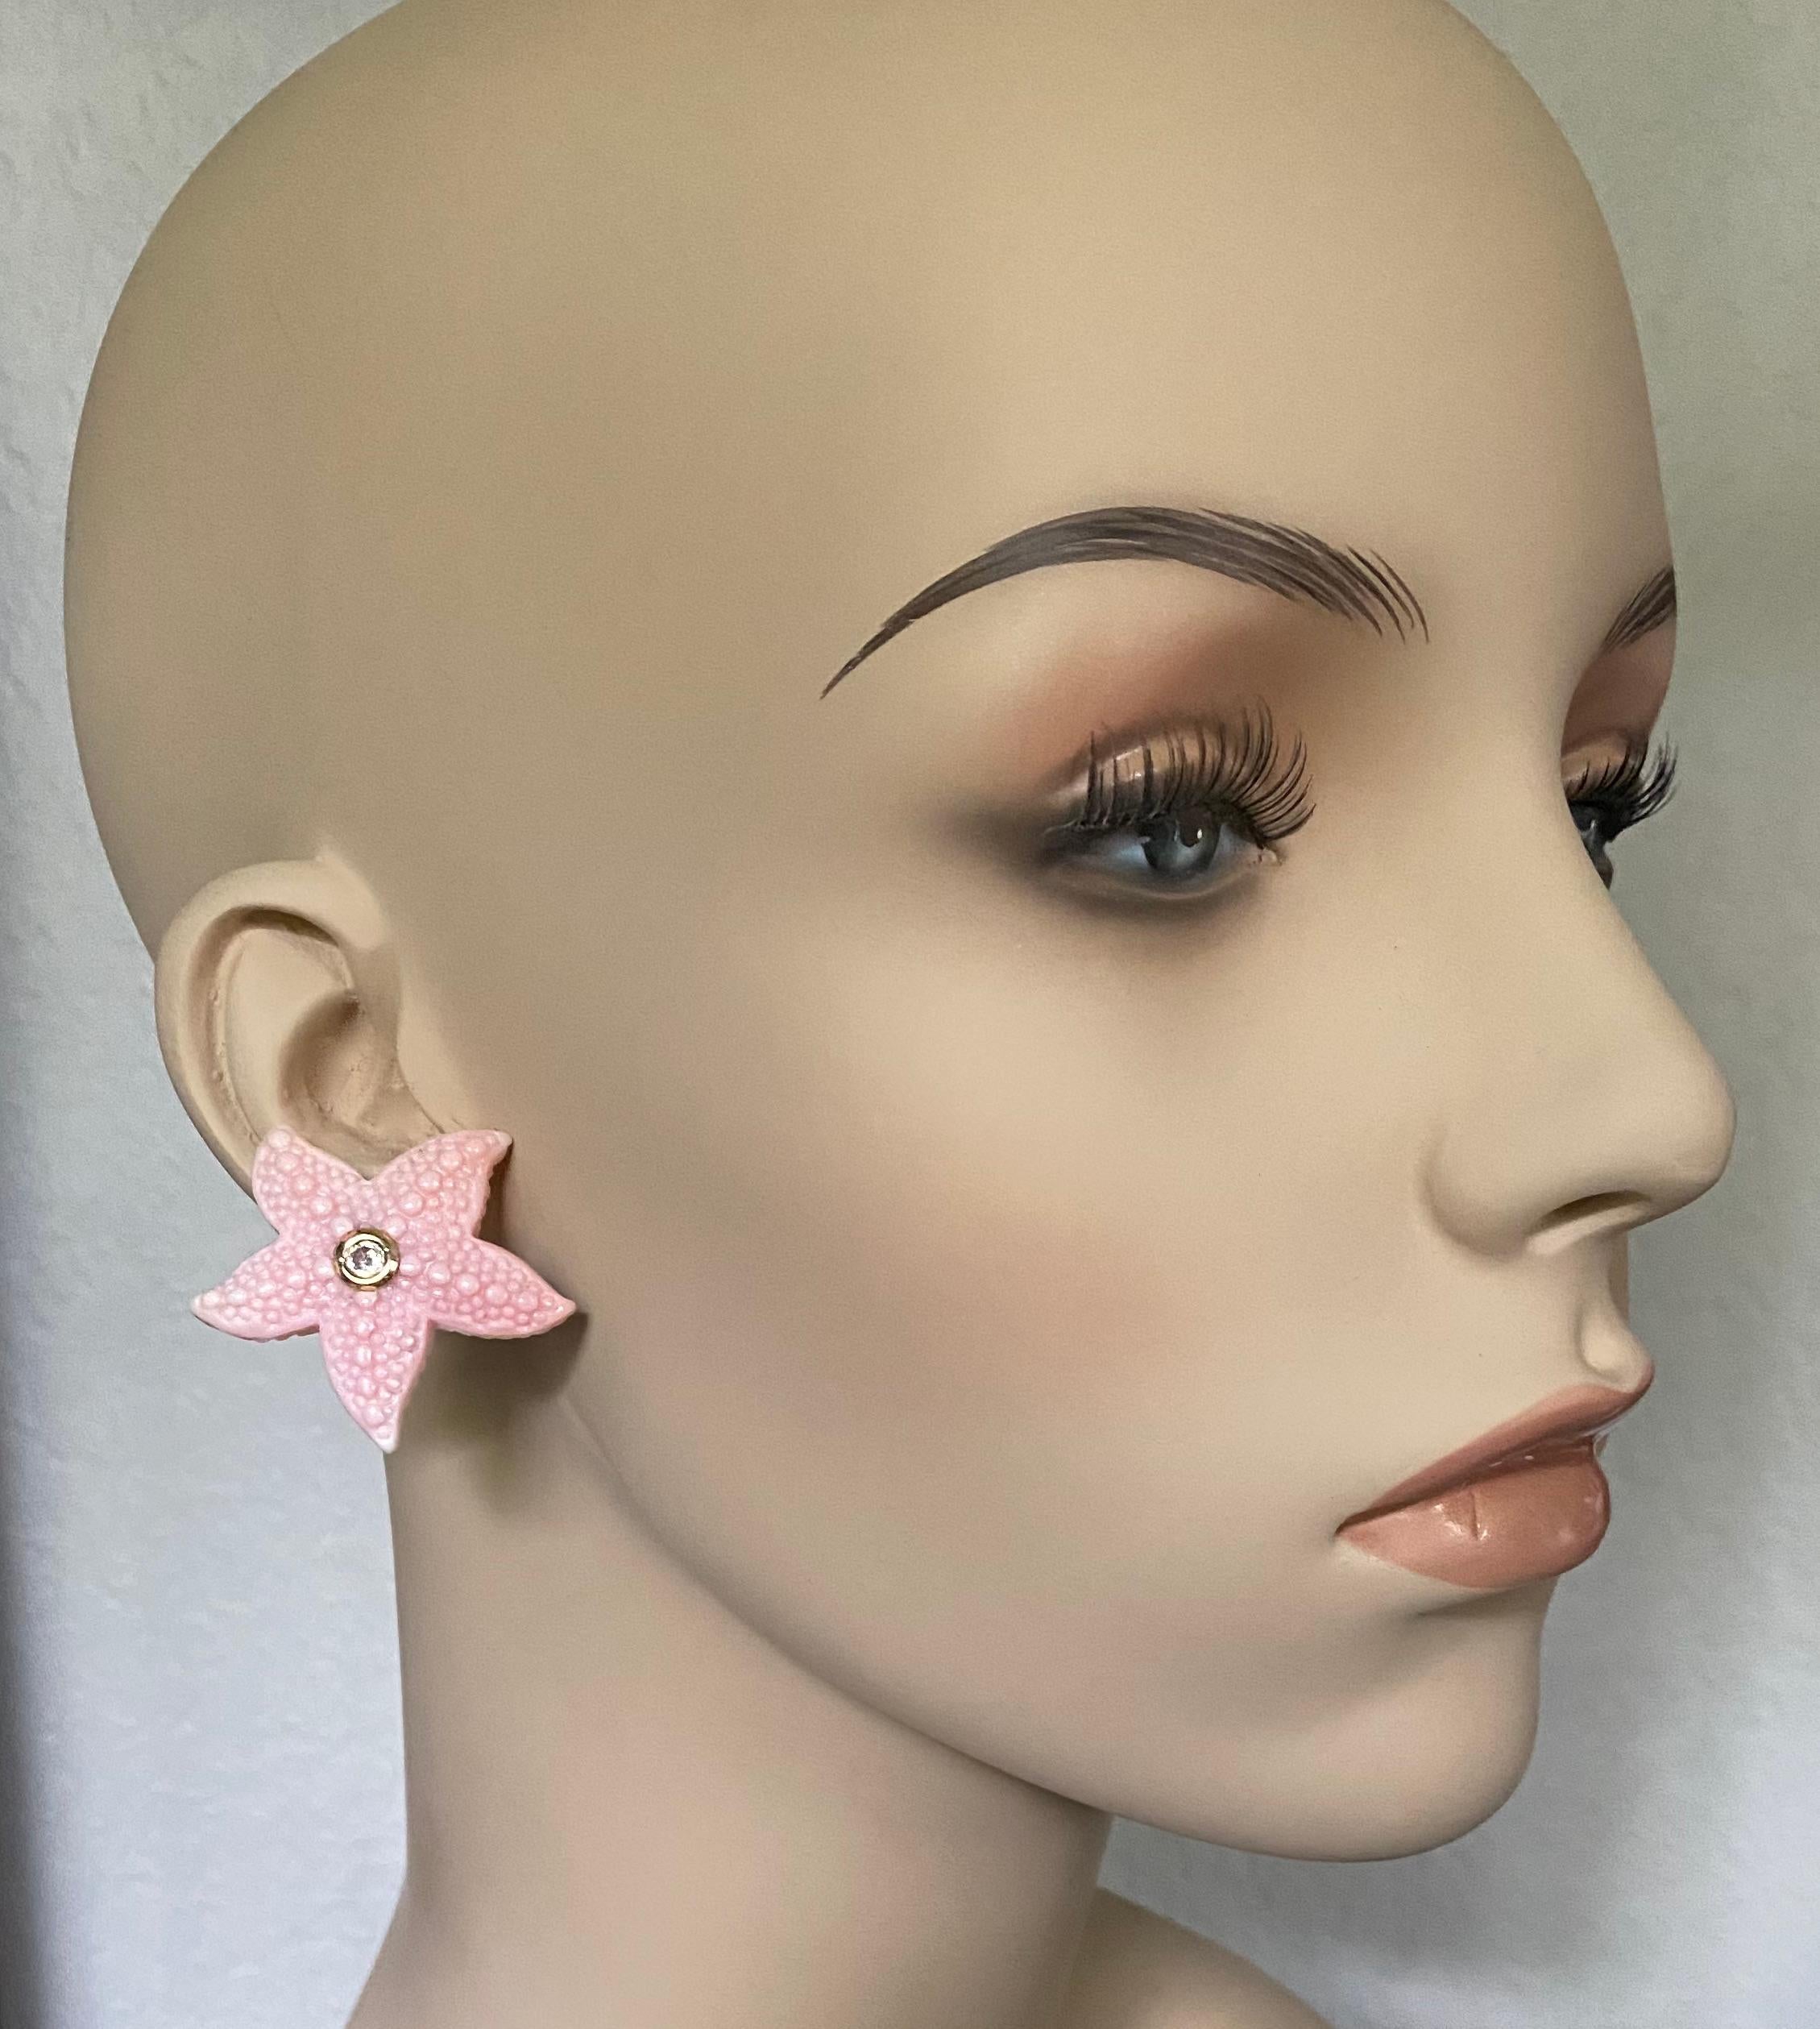 Carved Queen Conch Shell starfish are decorated with diamonds in these whimsical button earrings.  The carvings are expertly executed with exceptional detail.  Mounted in the center of each starfish is a bezel set white diamond.  These one-of-a-kind